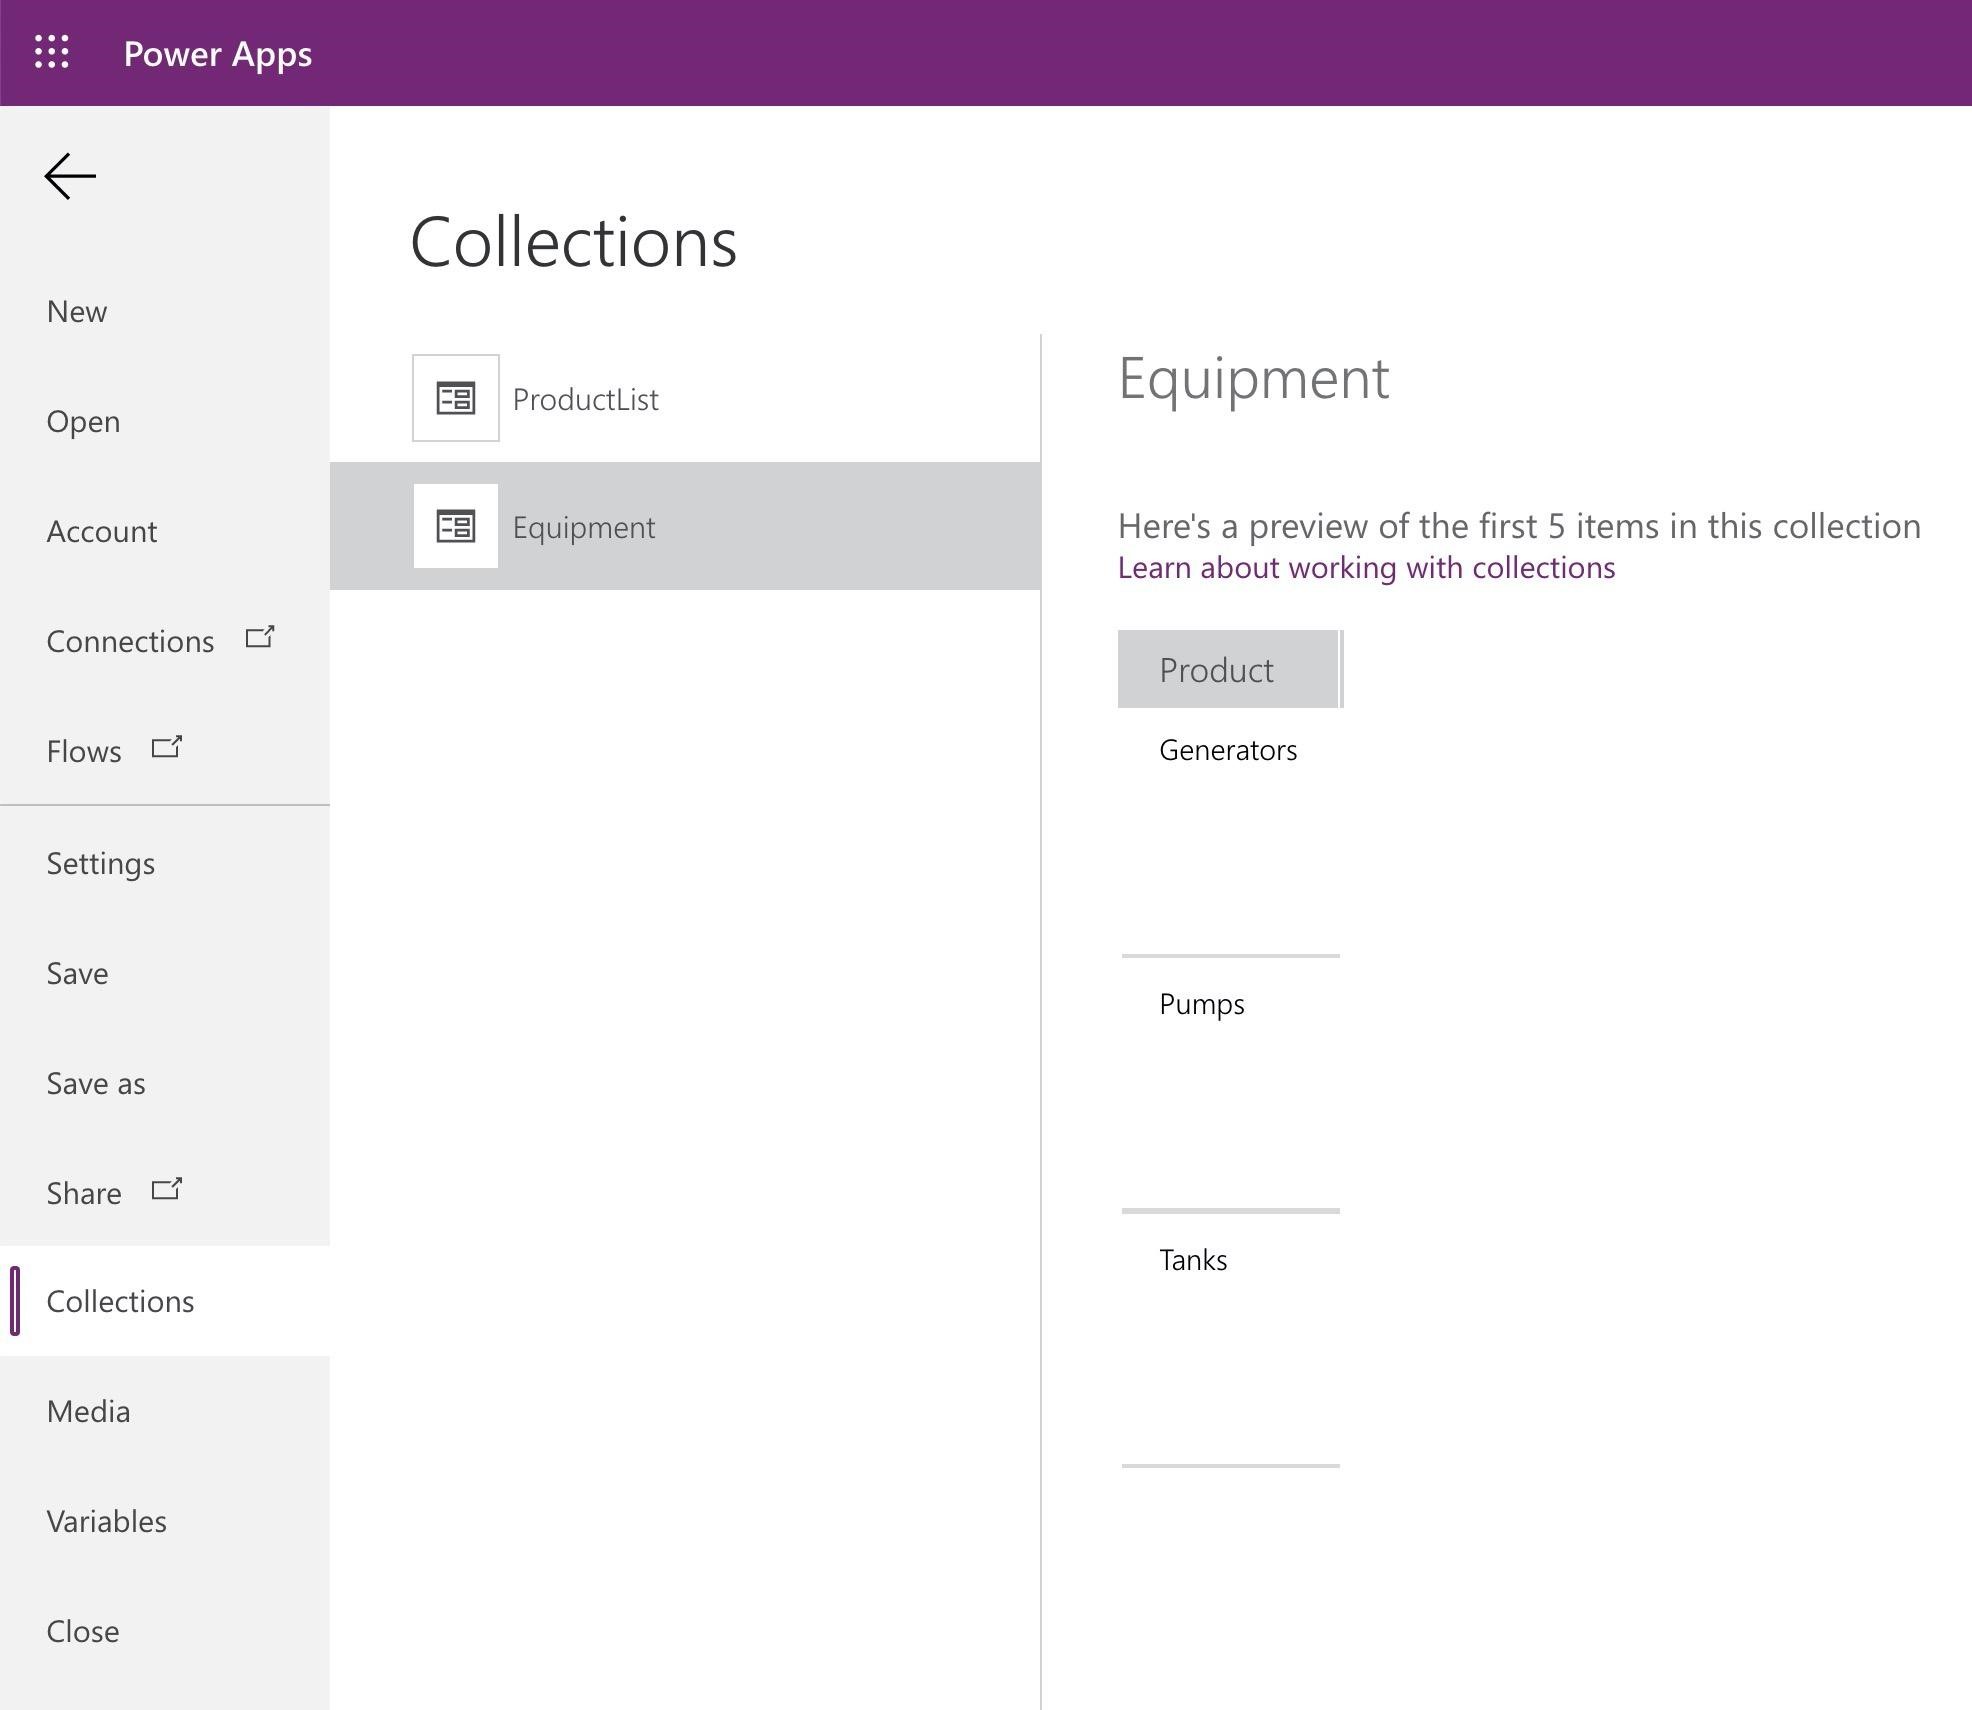 2: Power Apps

°
°

<<
Collections

New
ProductList Eq ul pment
Open
Account Equipment Here's a preview of the first 5 items in this collection

Learn about working with collections

Connections

Product
Flows Generators
Settings
Save

Pumps
Save as
Share Cf

Tanks
Collections
Media
Variables

Close